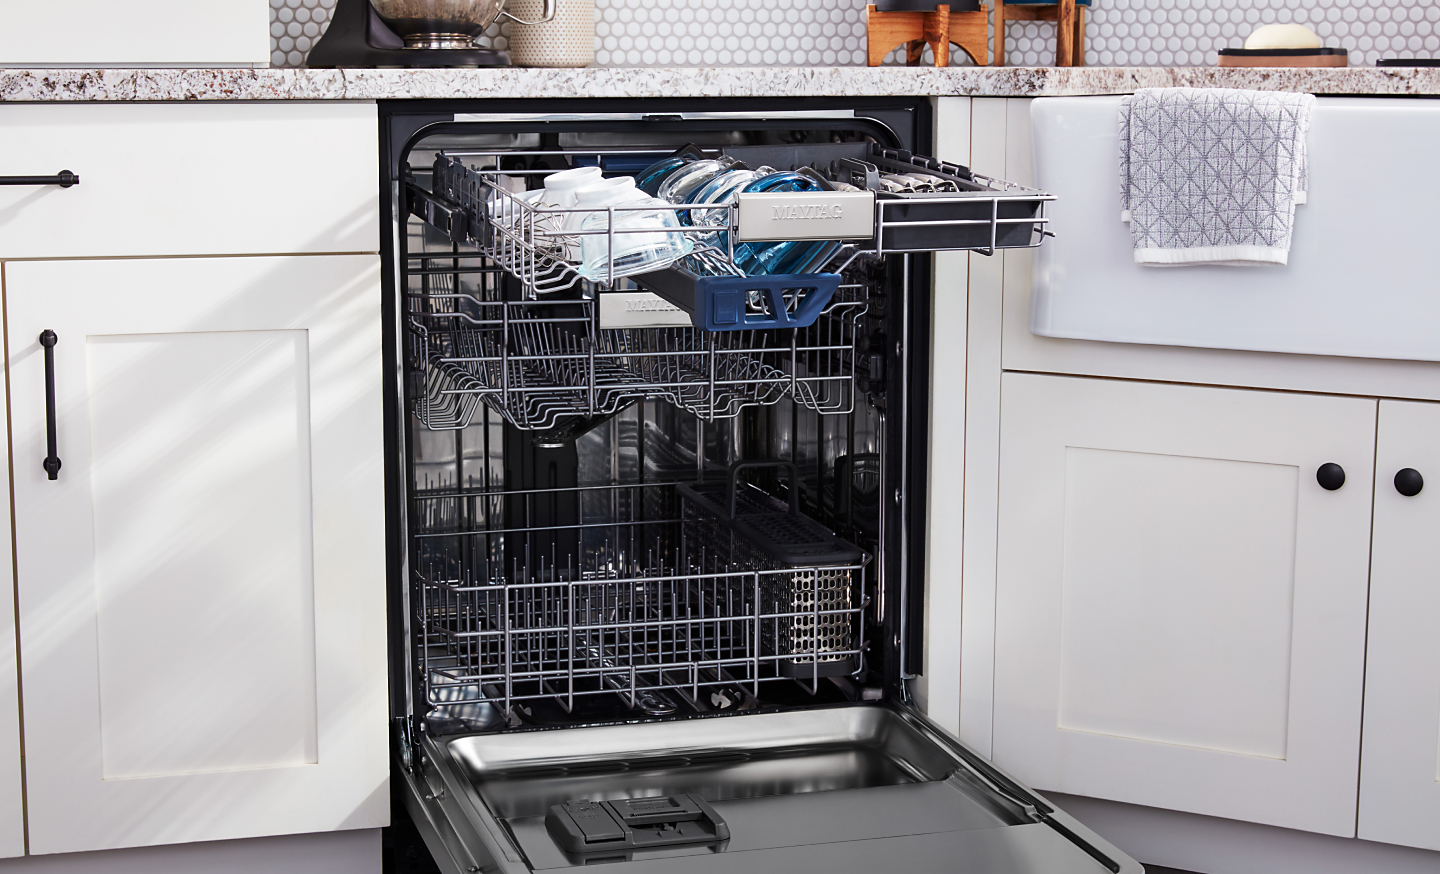 How to Reset Maytag Dishwasher? 